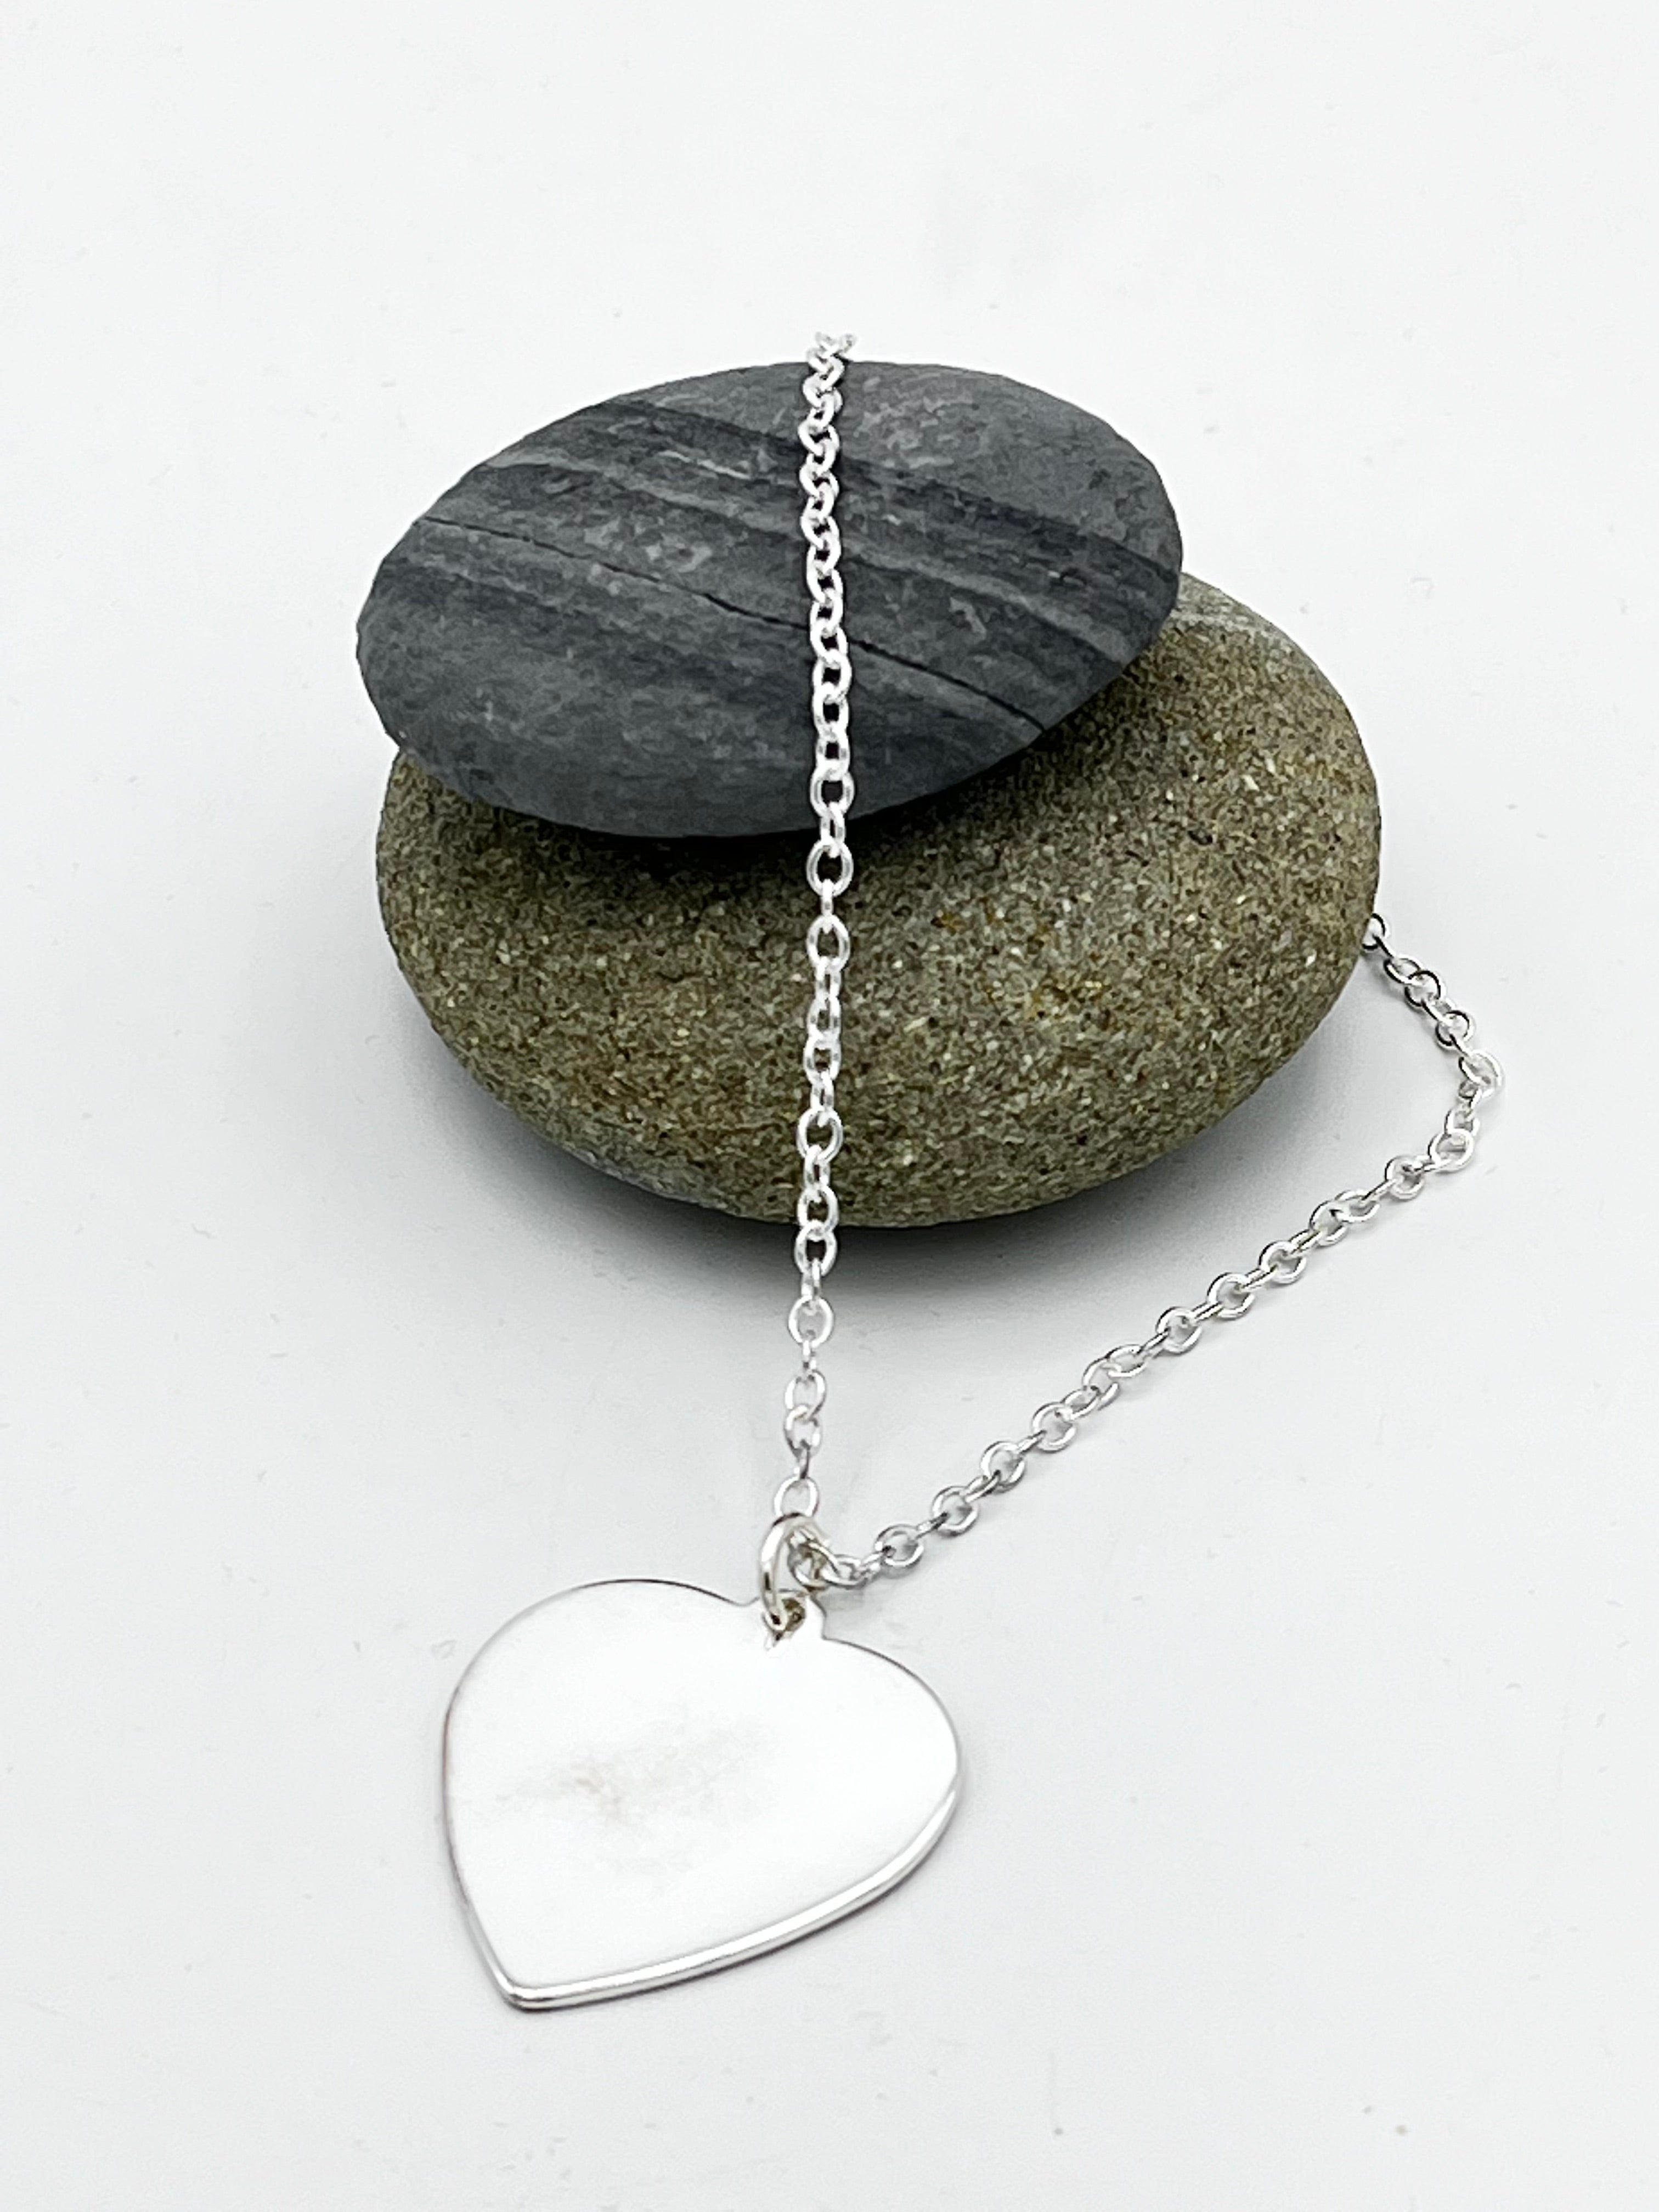 Single heart pendant 25mm wide hammered finish on 16" trace chain